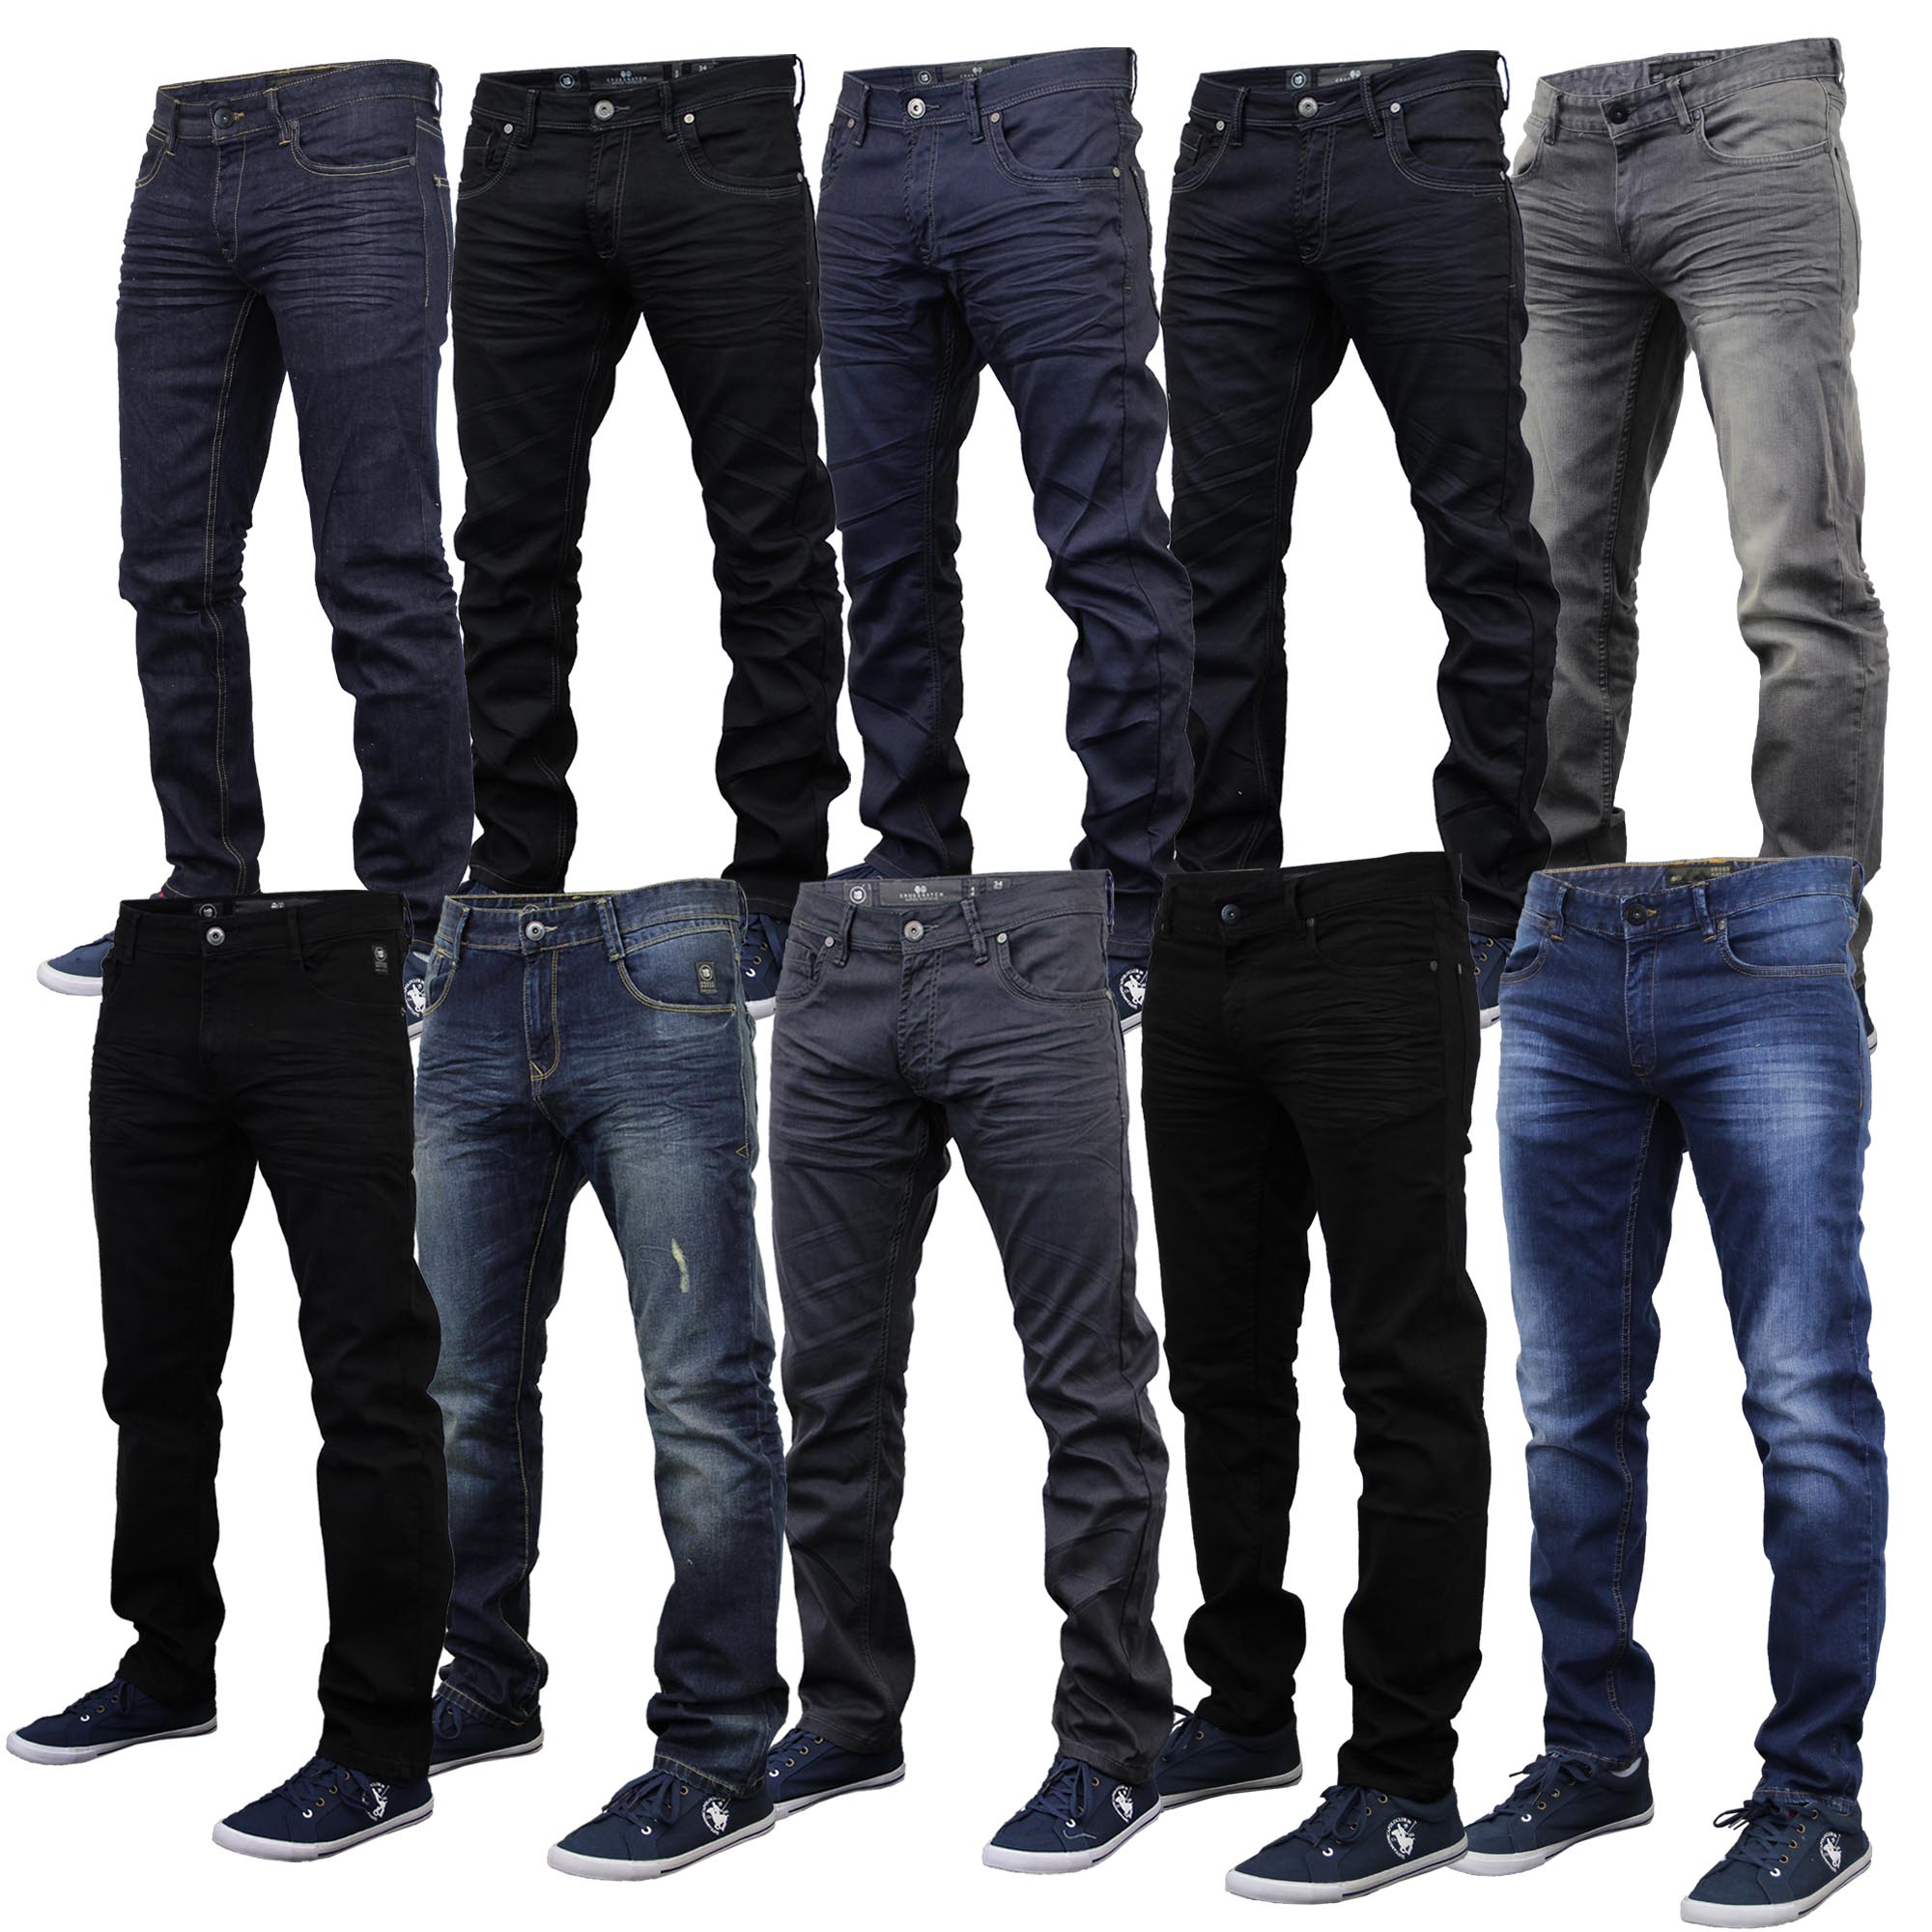 How to import jeans from Turkey | importing house